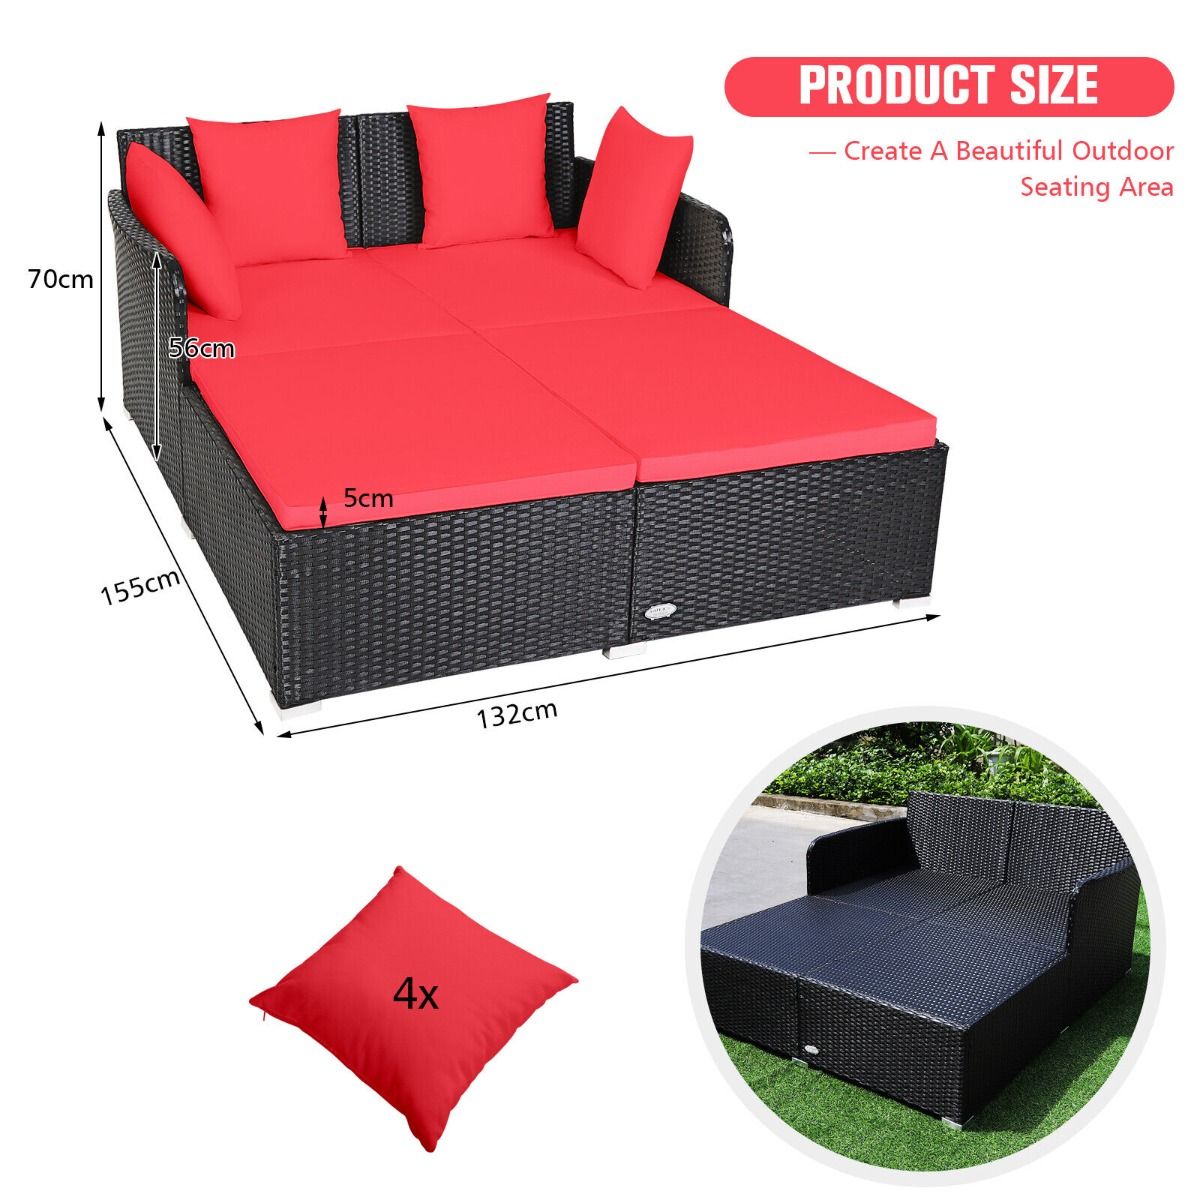 Rattan Garden 2 Seater Daybed Furniture Set with Cushions - Red